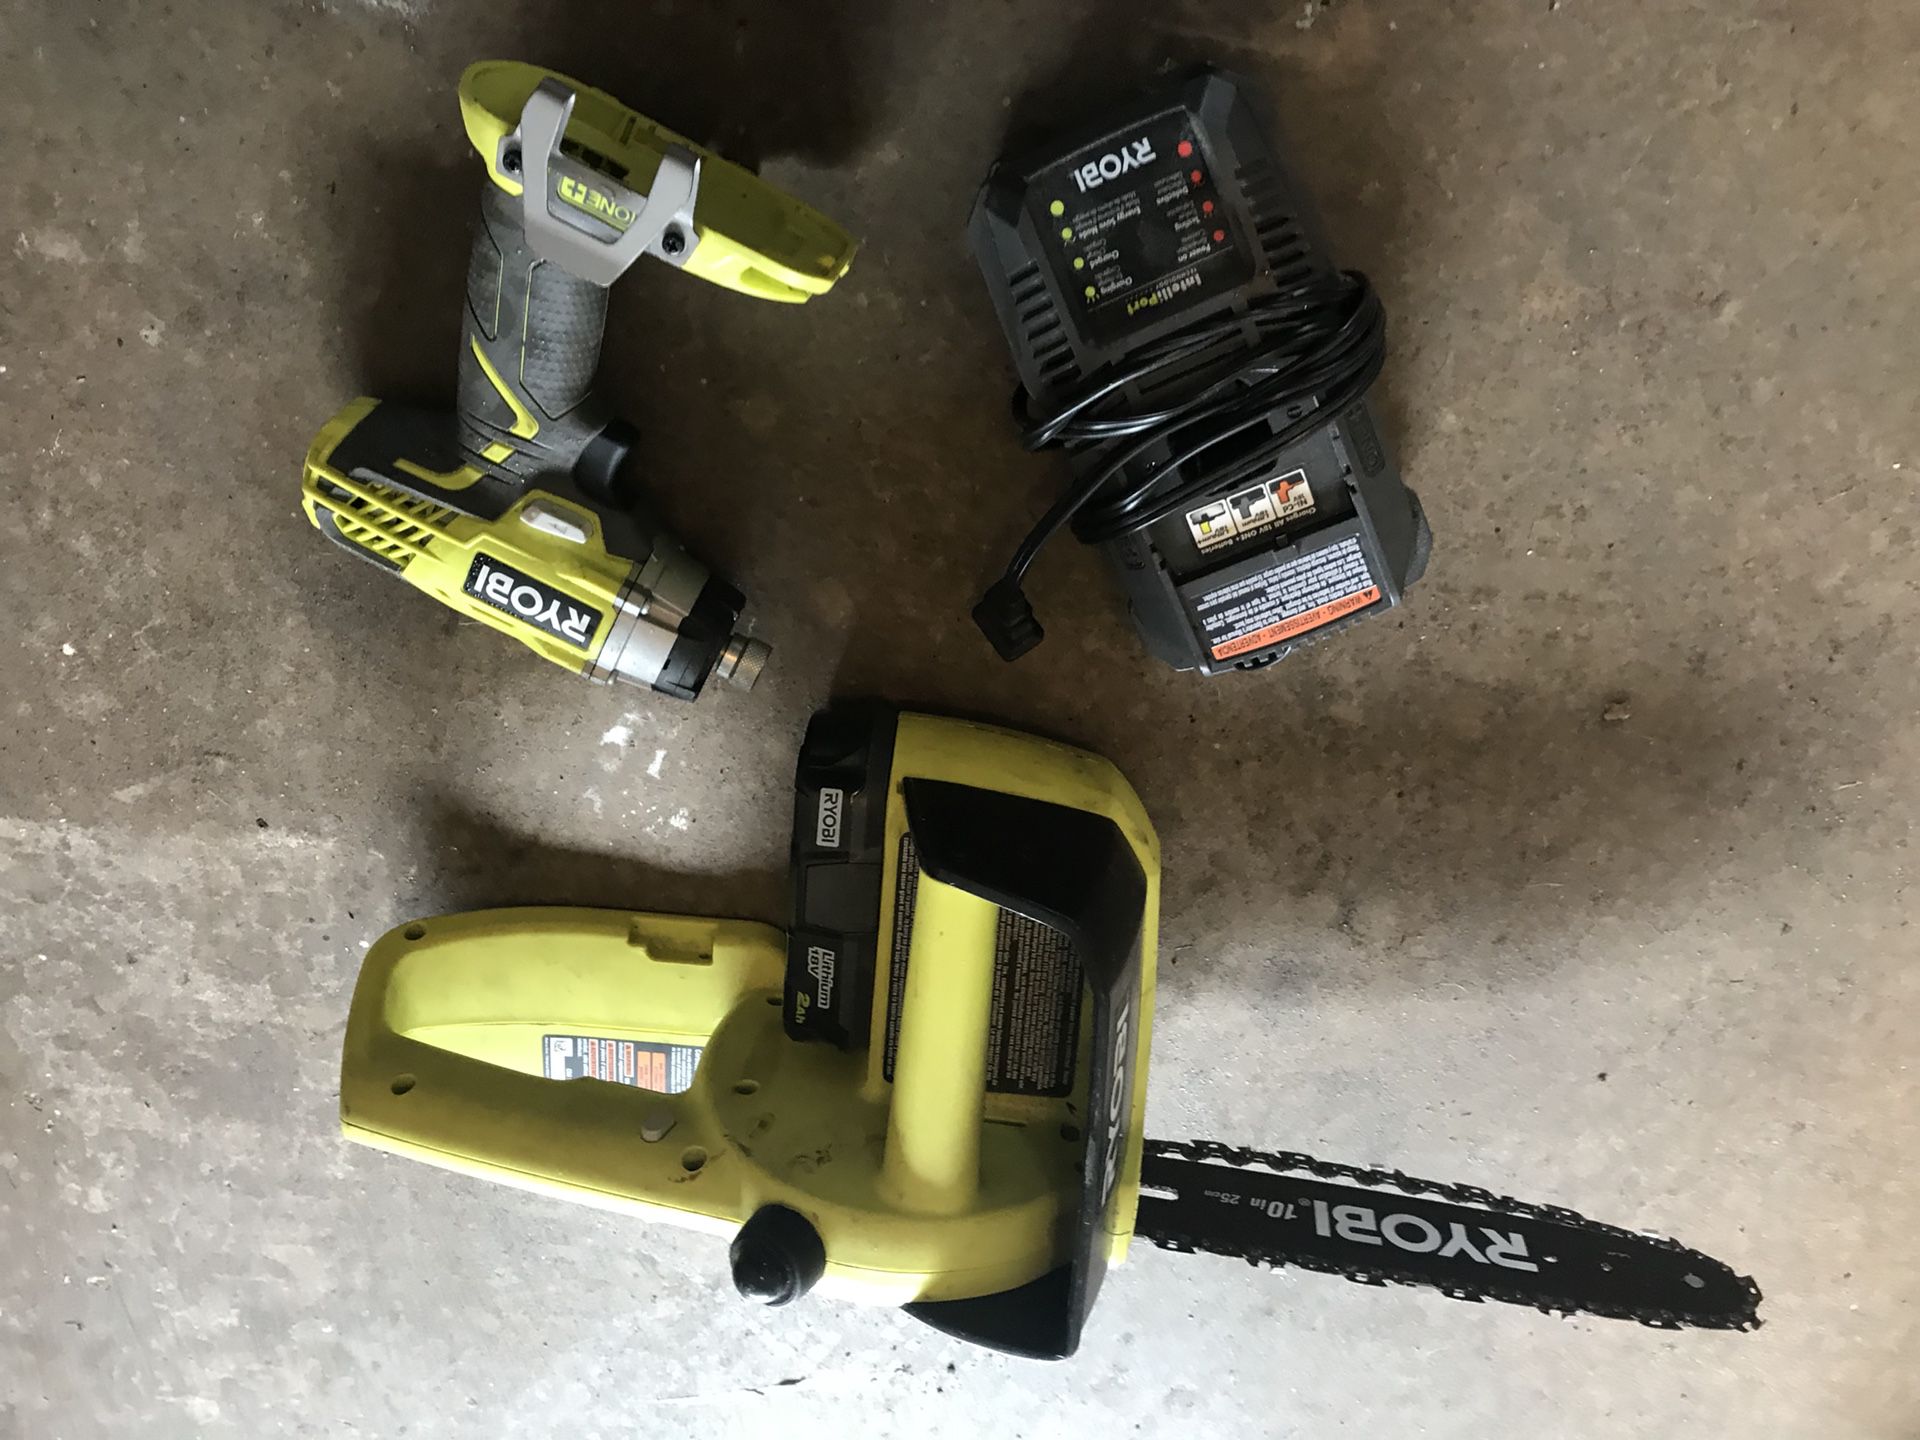 Ryobi 10 in chainsaw, drill, battery and charger